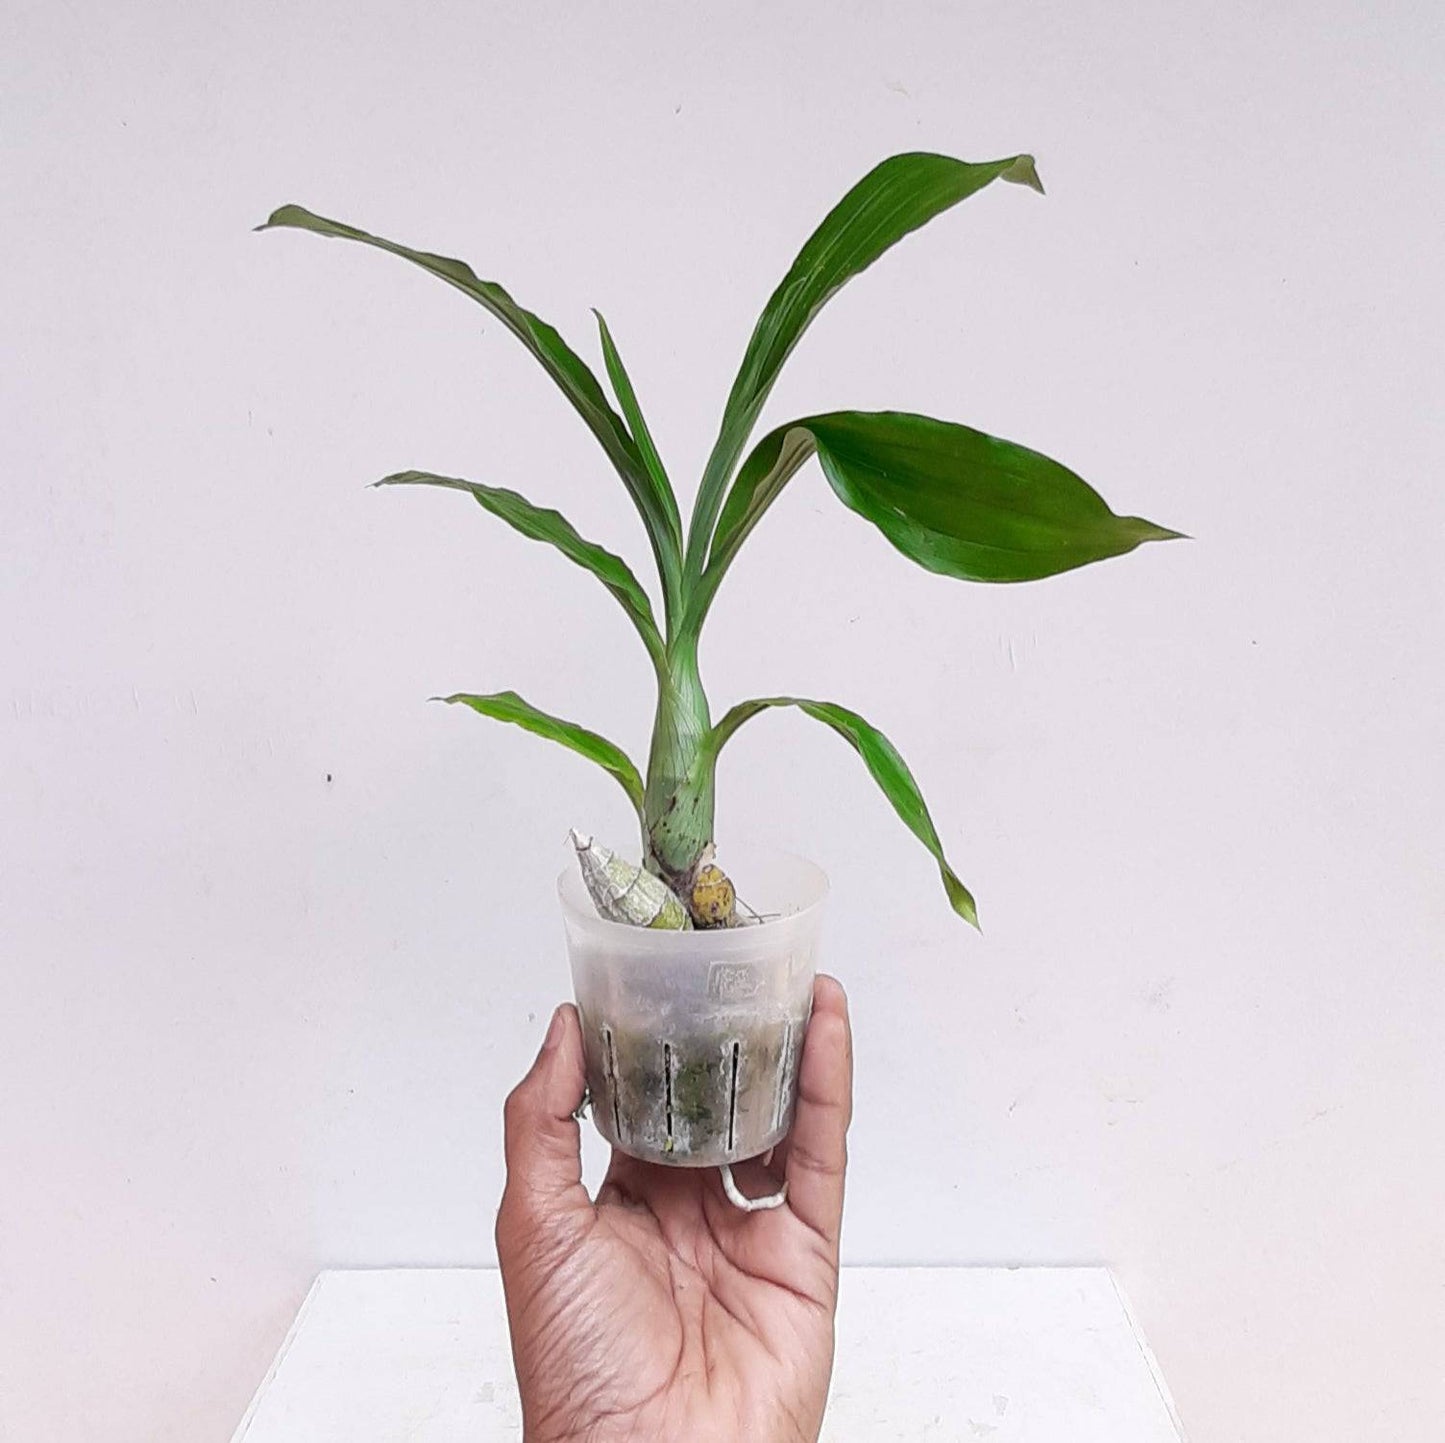 Catasetum Pileatum White - Without Flower | BS - Buy Orchids Plants Online by Orchid-Tree.com